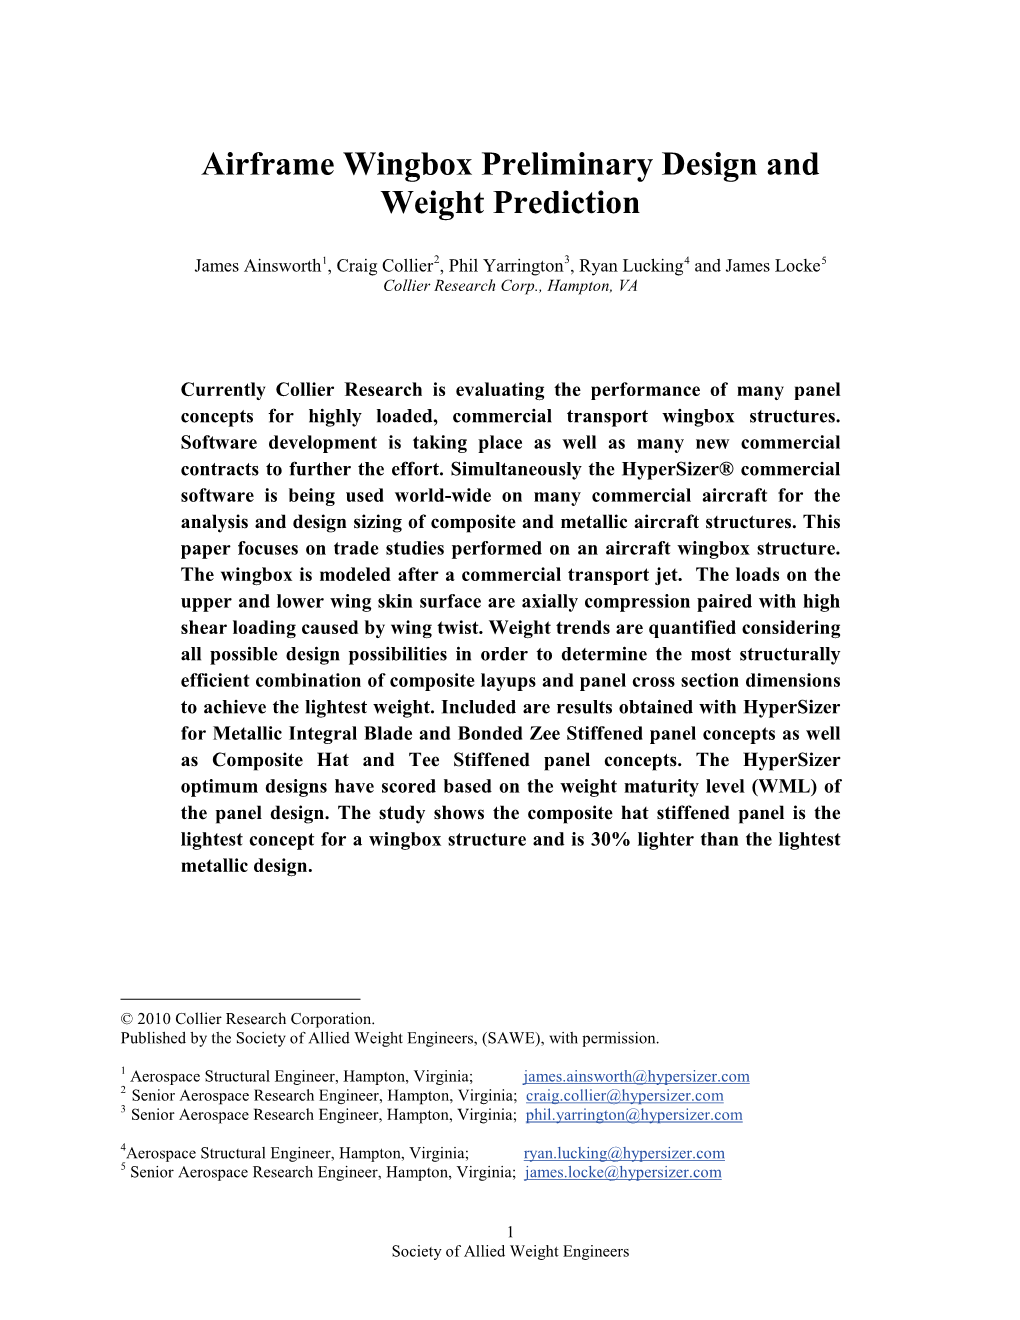 Airframe Wingbox Preliminary Design and Weight Prediction